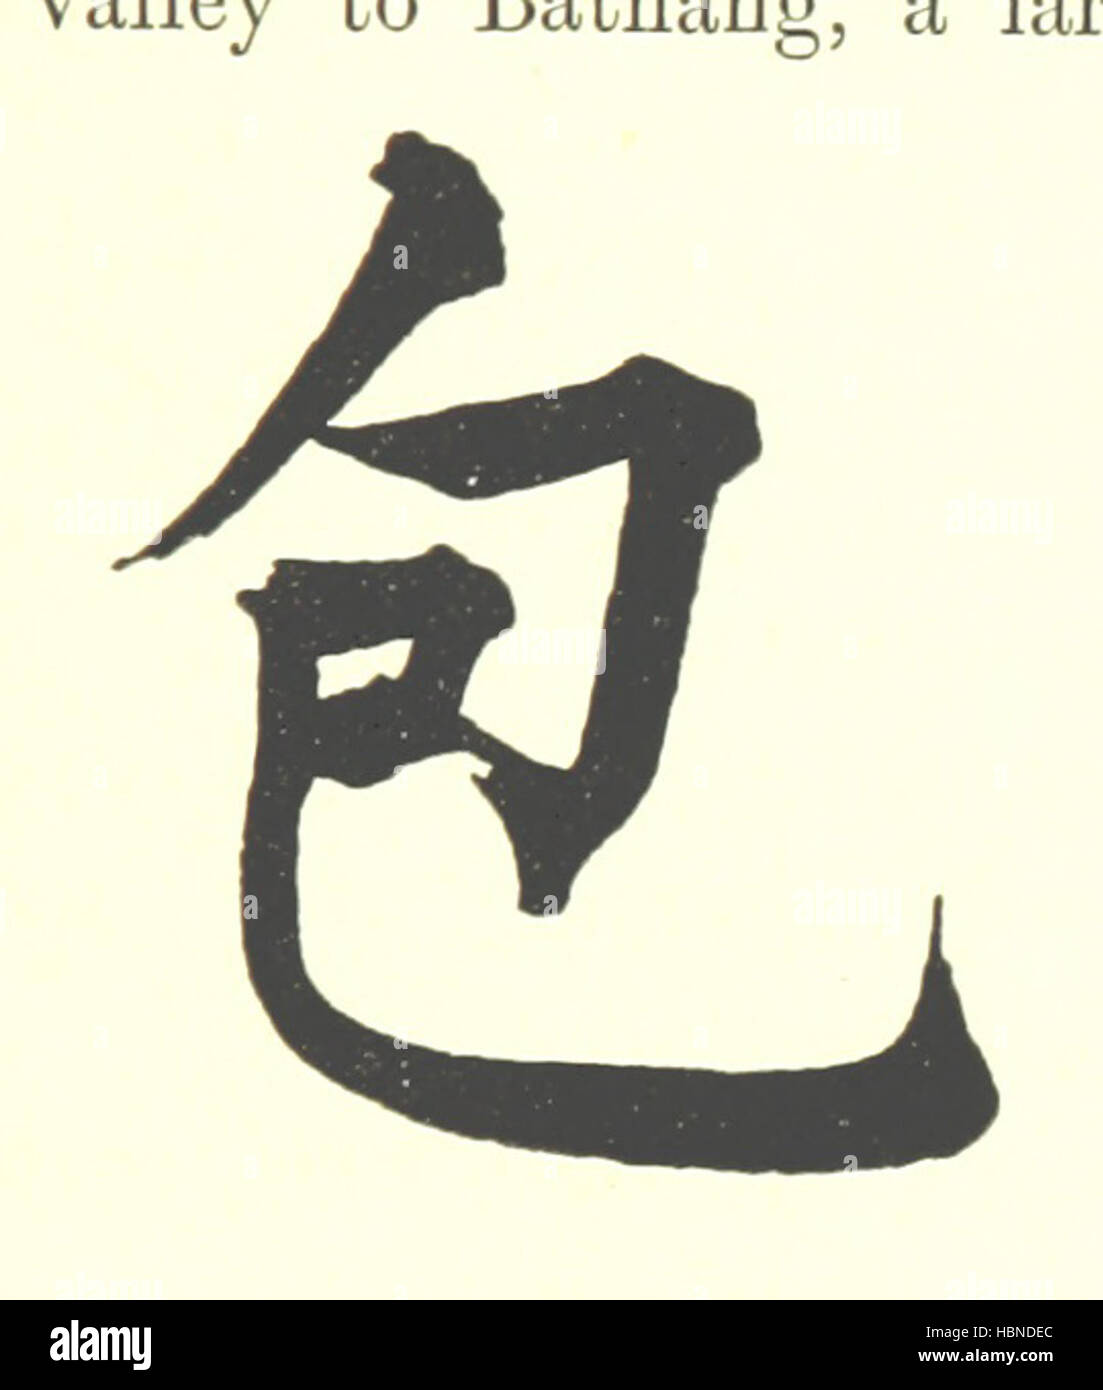 Image taken from page 245 of 'Diary of a Journey across Tibet ... With illustrations' Image taken from page 245 of 'Diary of a Journey Stock Photo